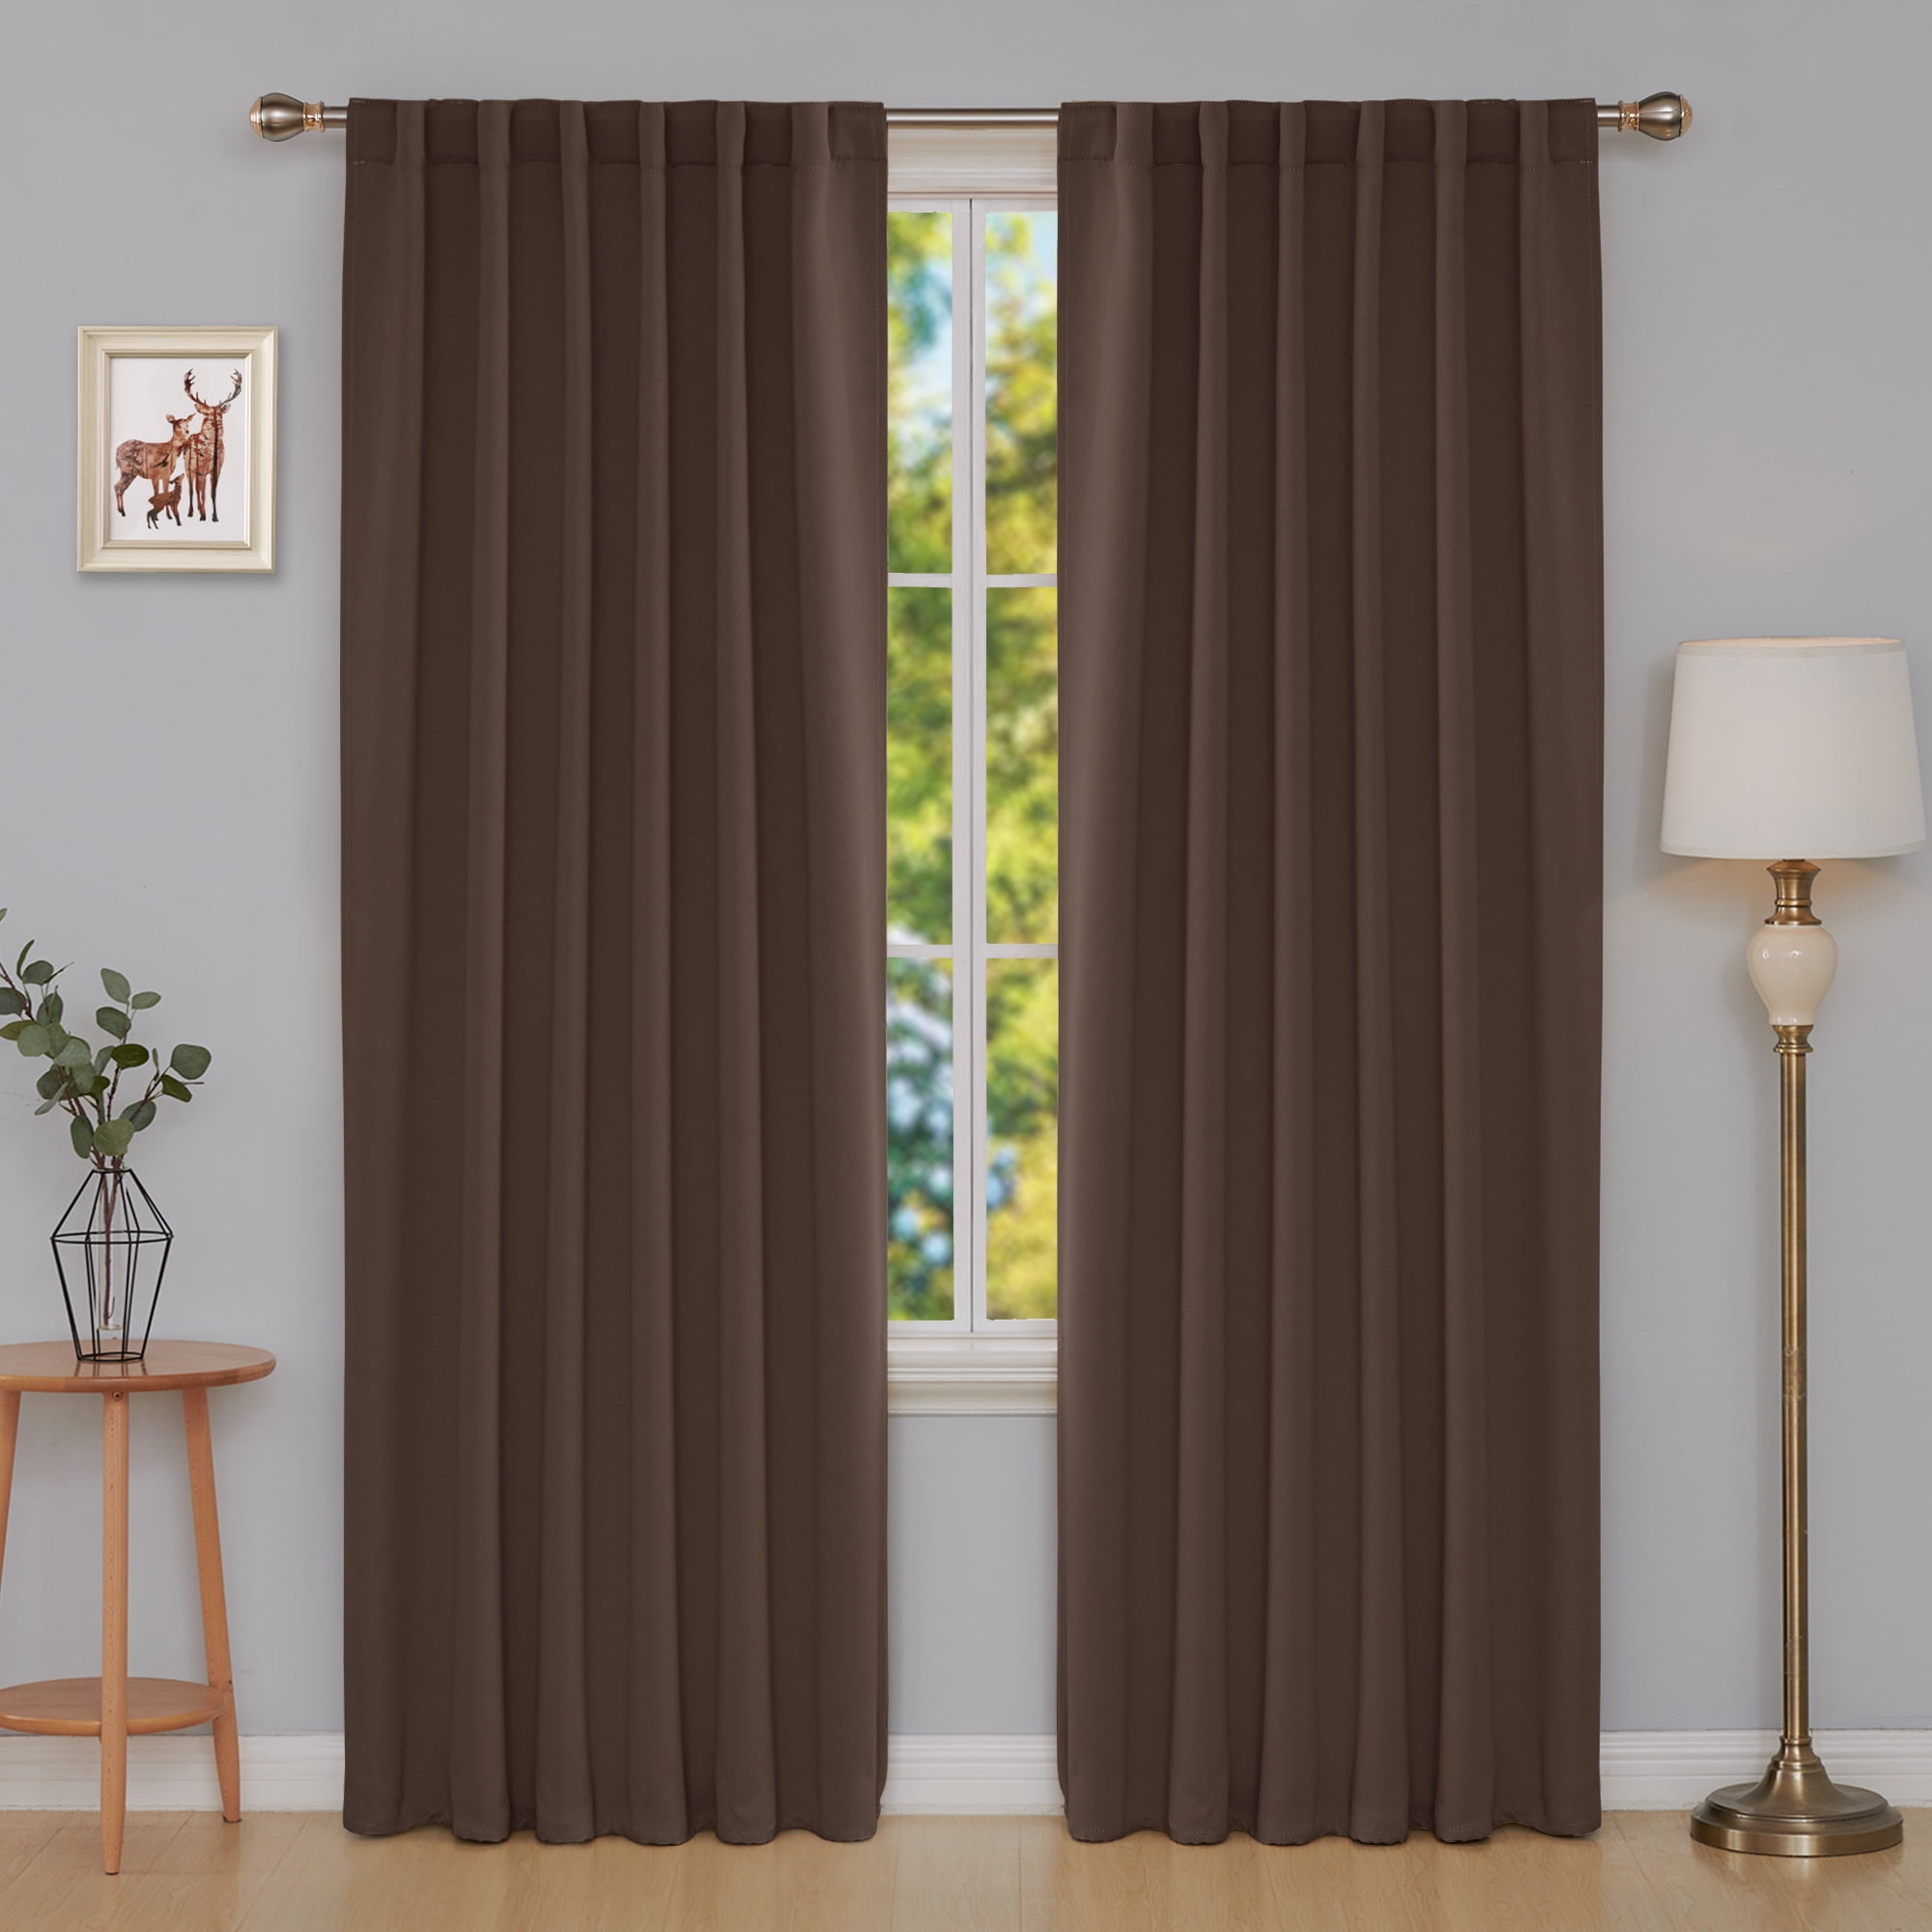 Deconovo Back Tab and Rod Pocket Blackout Curtains Thermal Insulated Window Curtain Set Solid Blackout Panels for Boys Room 52x95 inch Brown Set of 2